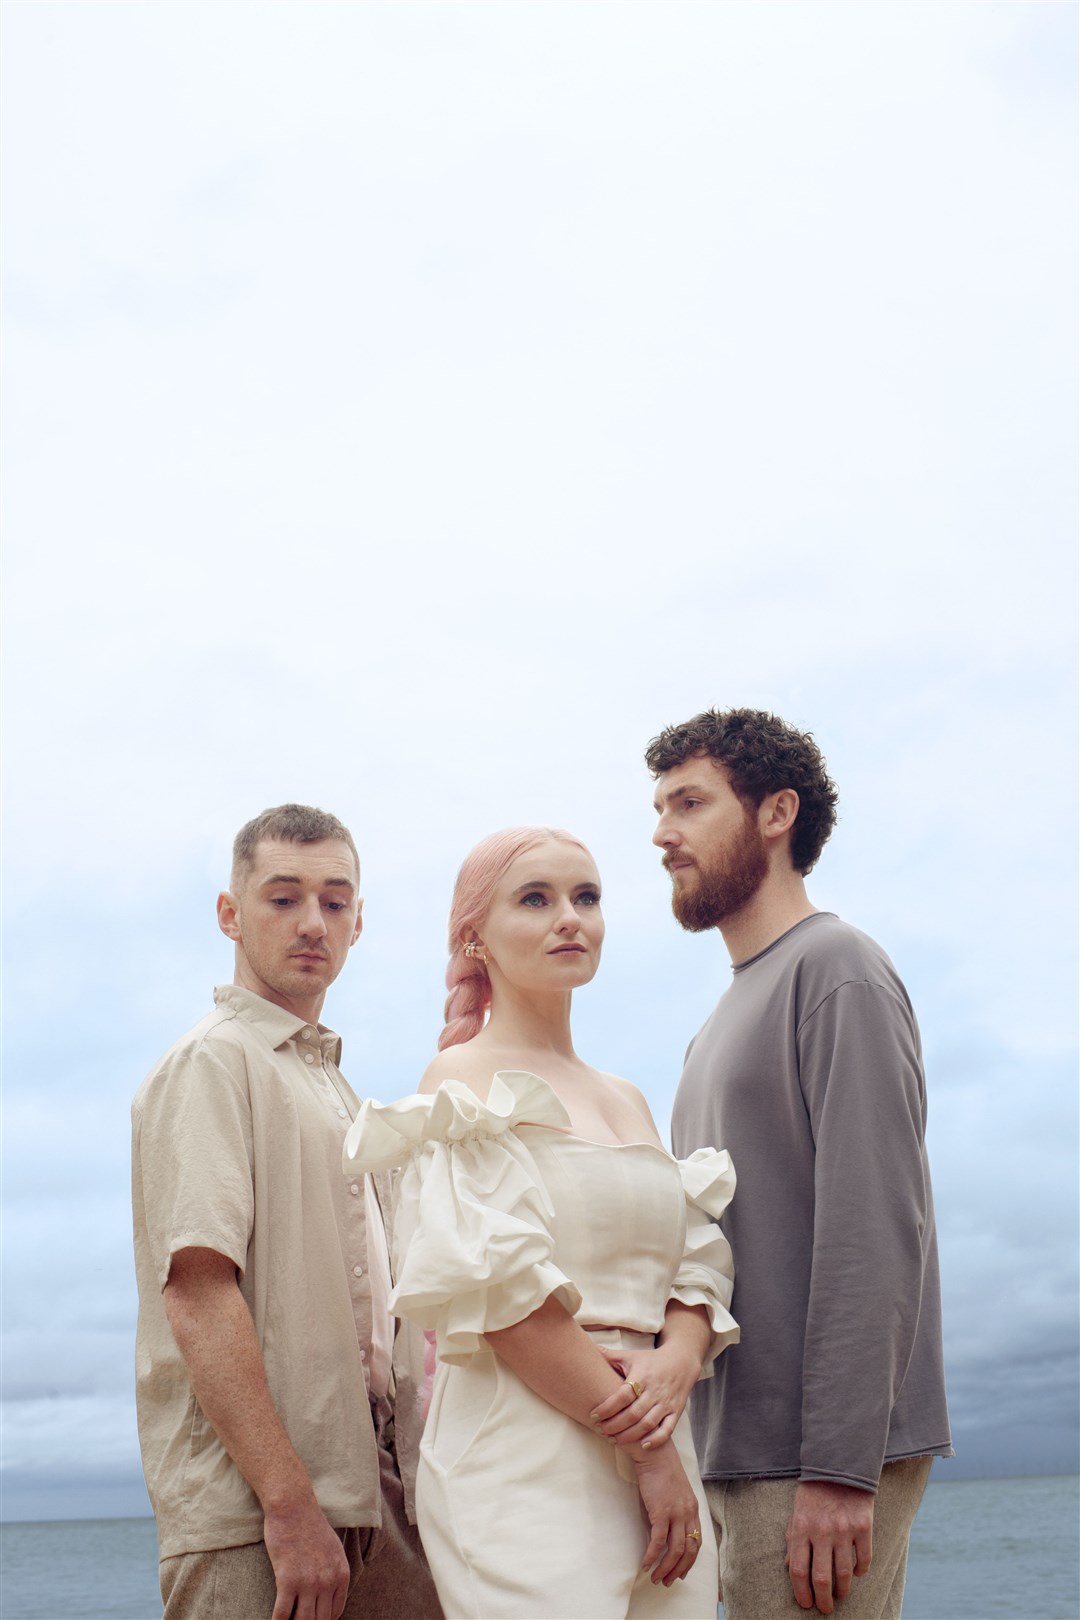 The trio, consisting of Grace Chatto and brothers Jack and Luke Patterson, are well known for pushing the boundaries of modern pop with their diverse blend of electronic, dancehall, classical and R&B.